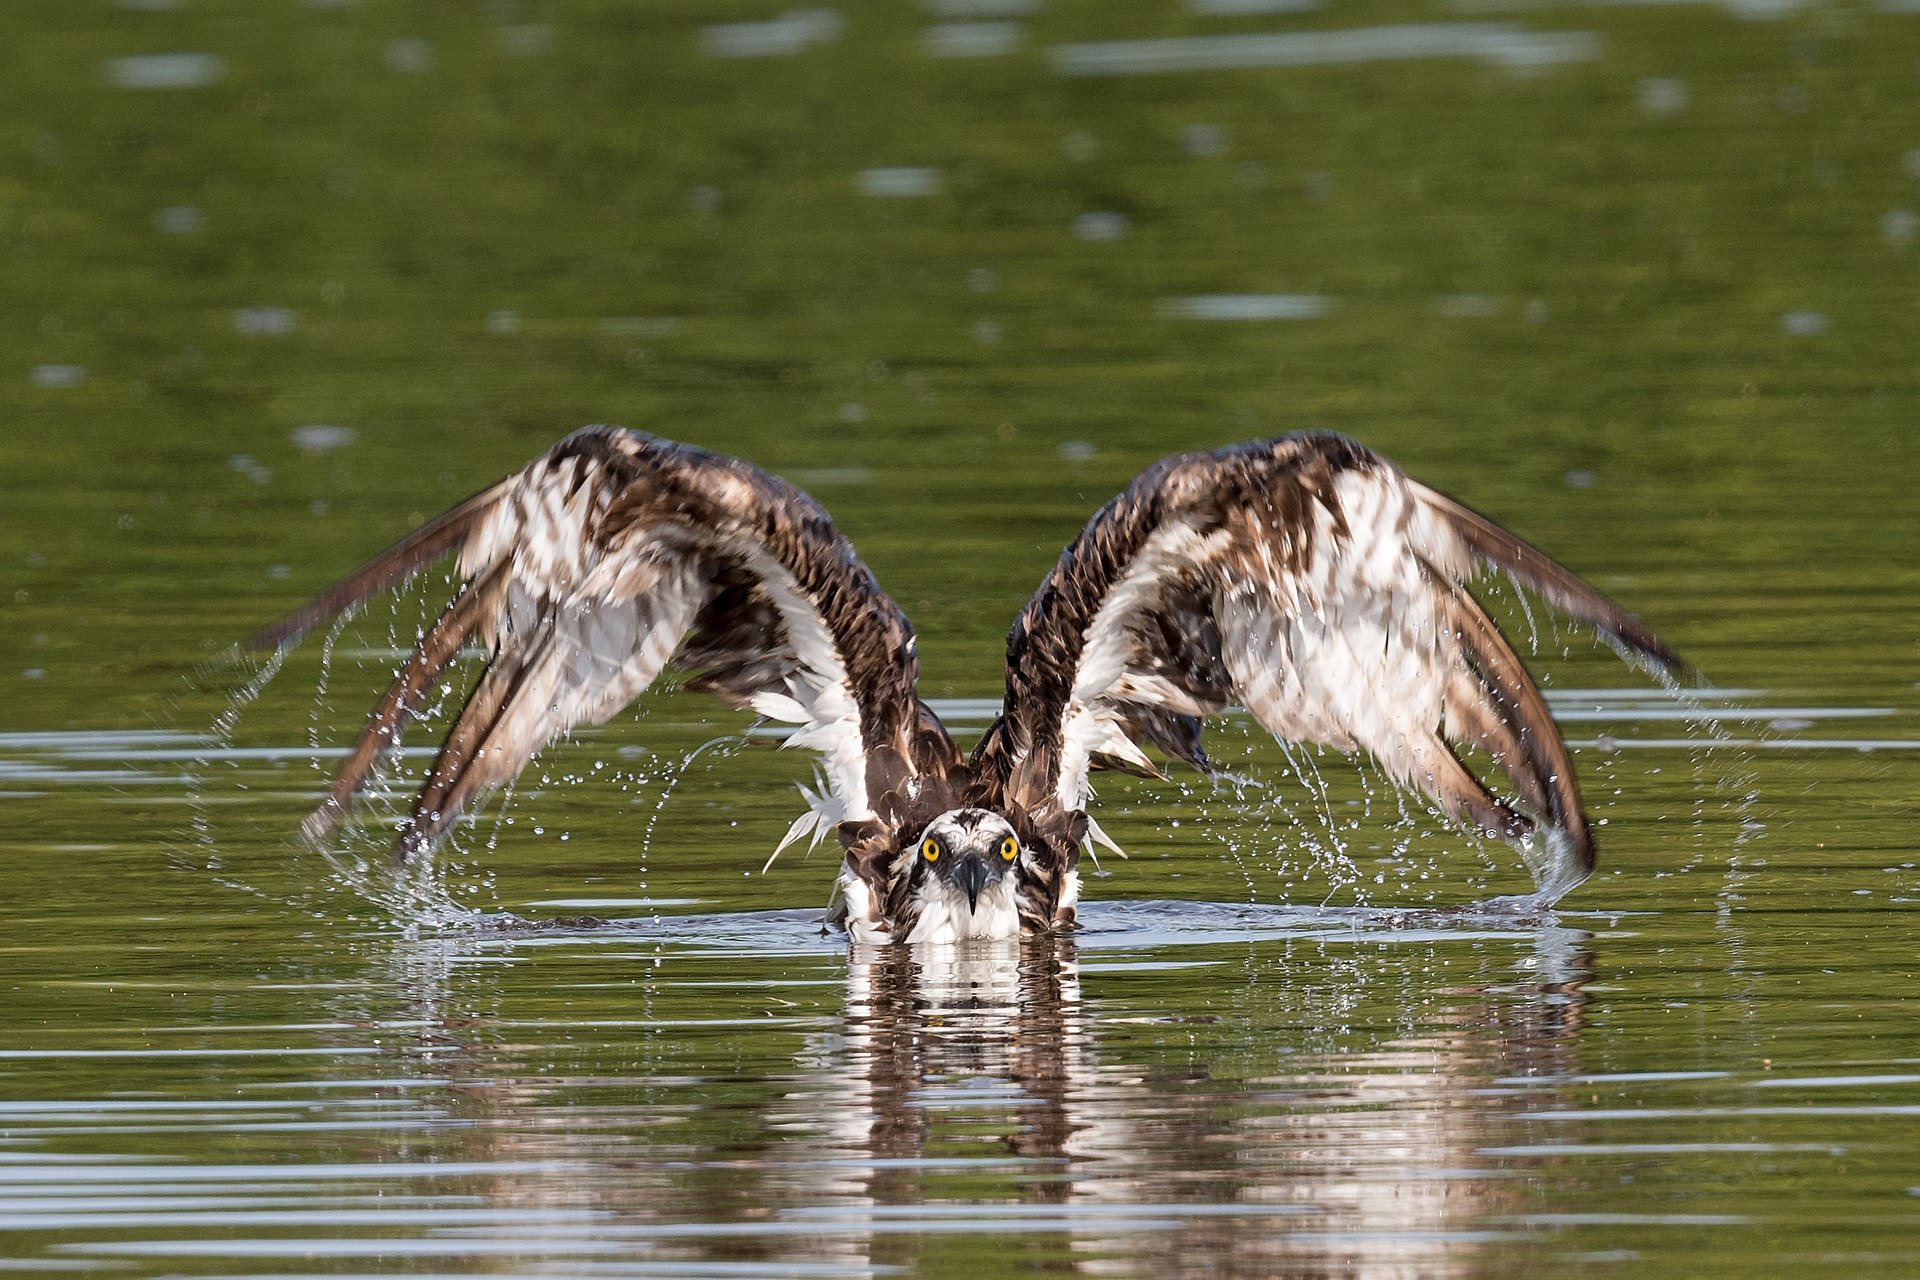 Osprey (Pandion haliaetus) catching prey, and taking off from the water.